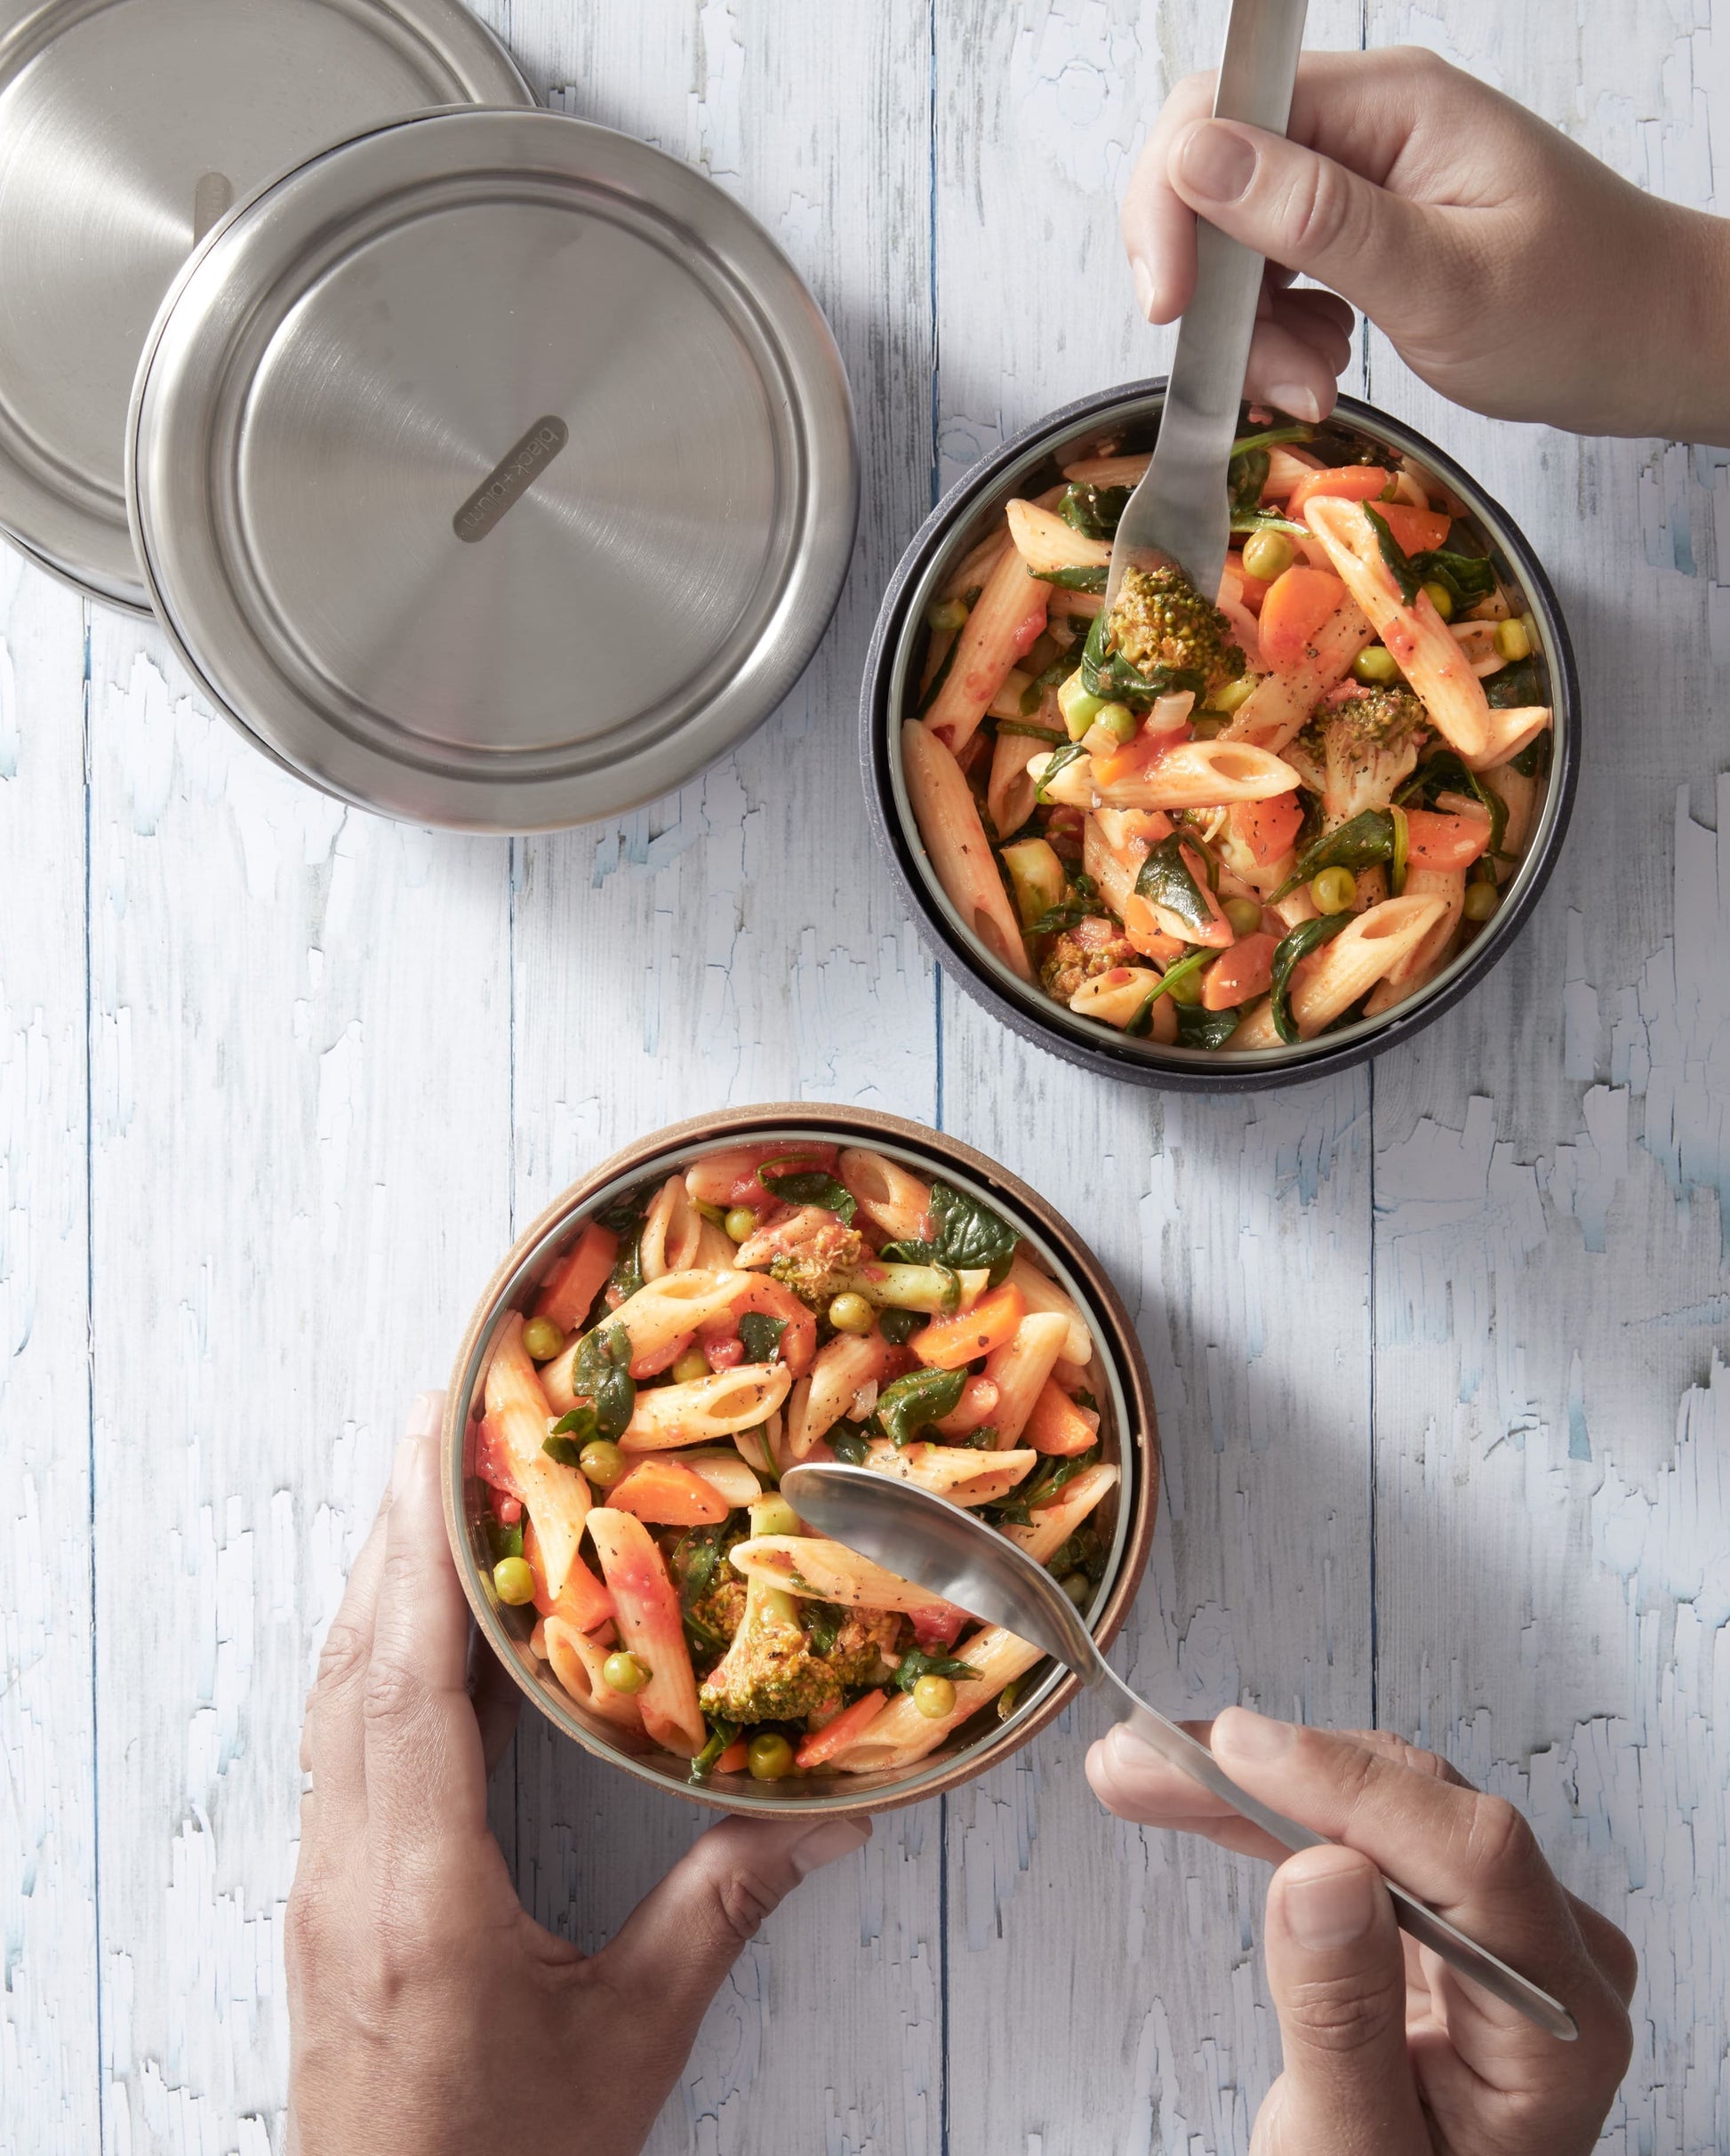 Penne Primavera on the go.  20 oz glass lunch pot with almond and slate wood fiber exterior and stainless steel lid.  100% leak proof.  microwave, freezer and dishwasher safe.